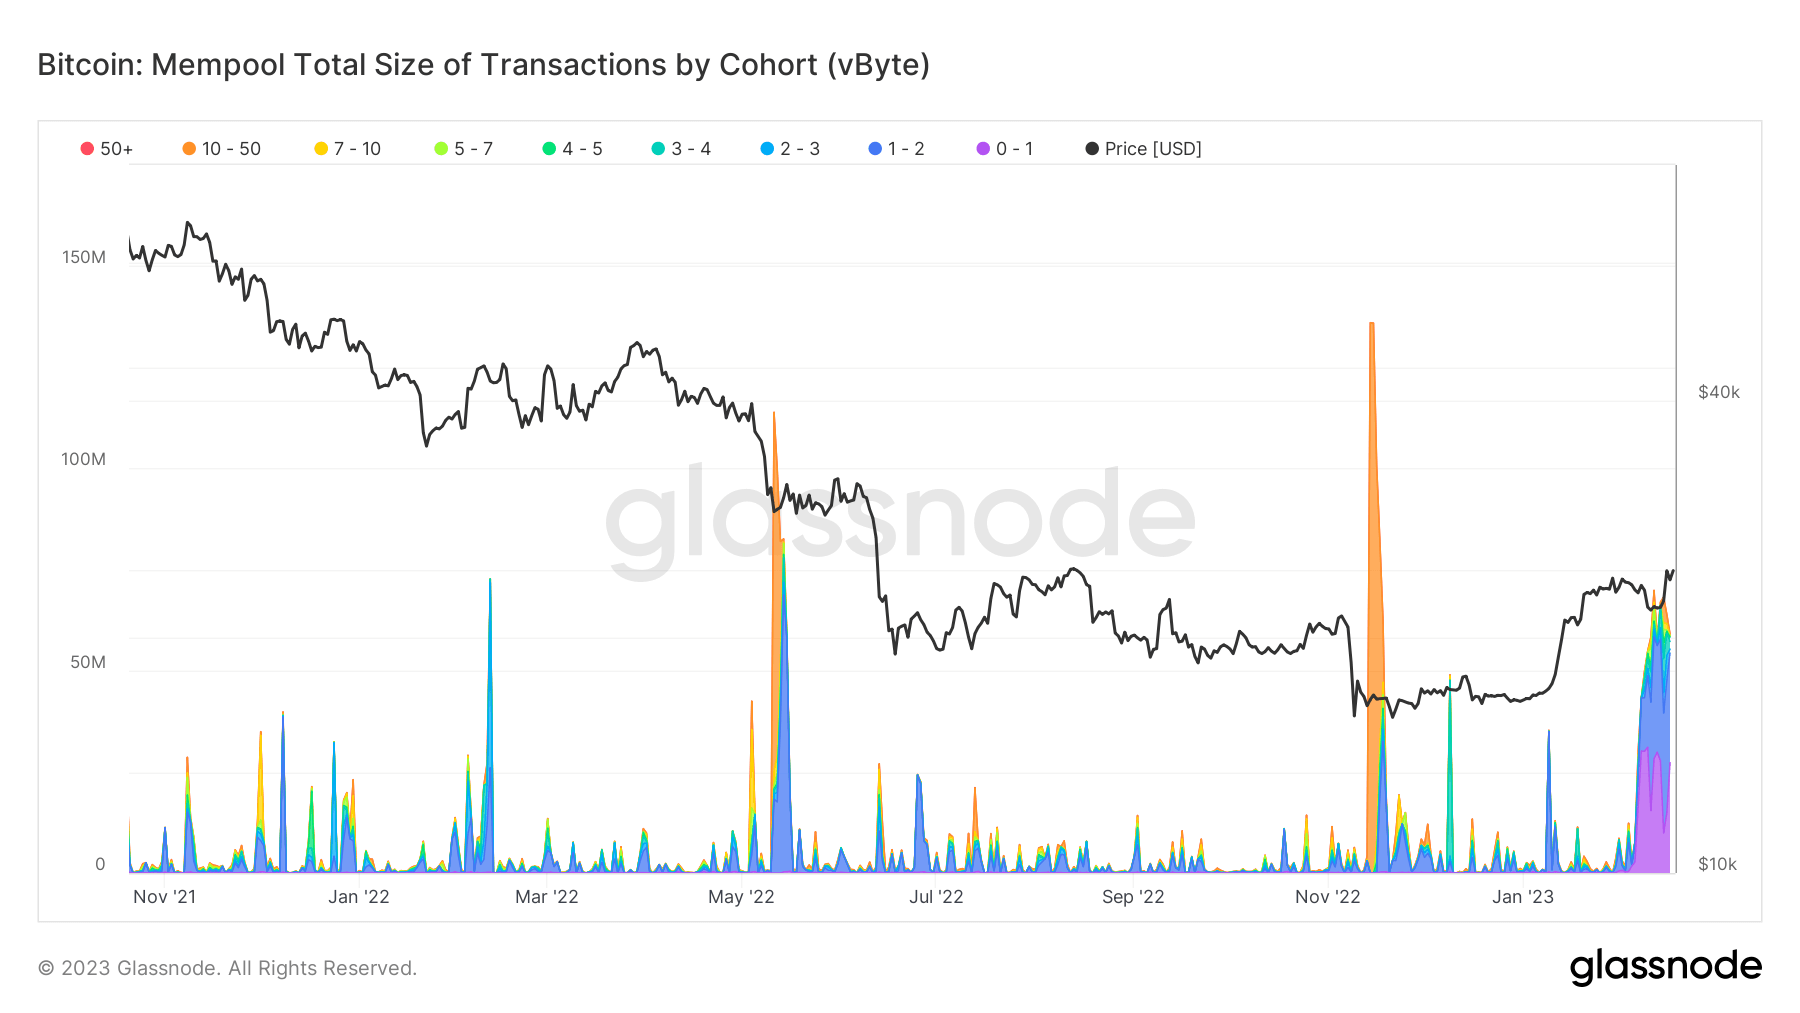 Bitcoin mempool total transaction size by cohort